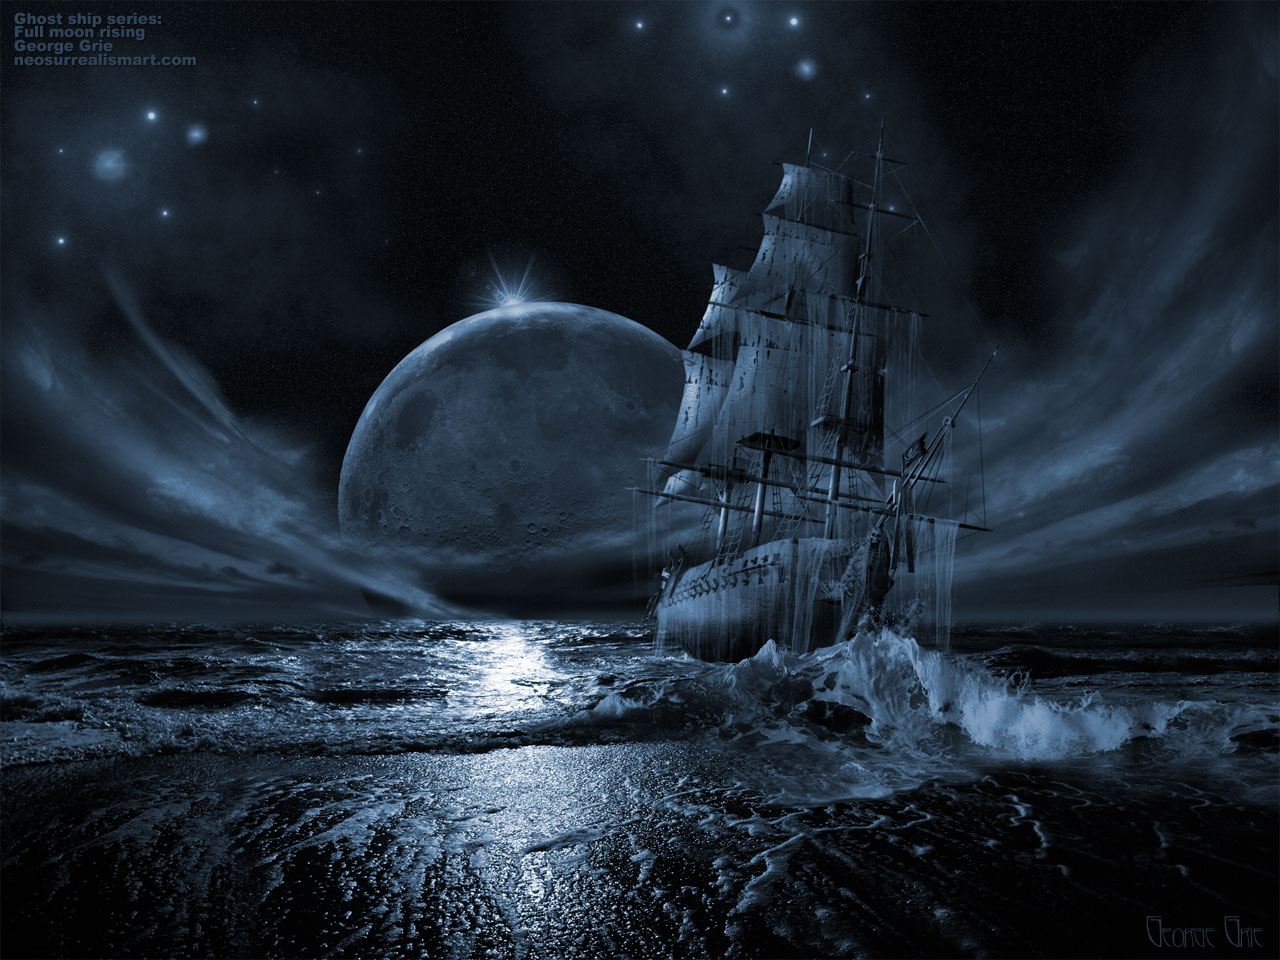 Free HQ 71 483d Ghost Ship Poster Wallpaper   HQ Wallpapers 1280x960